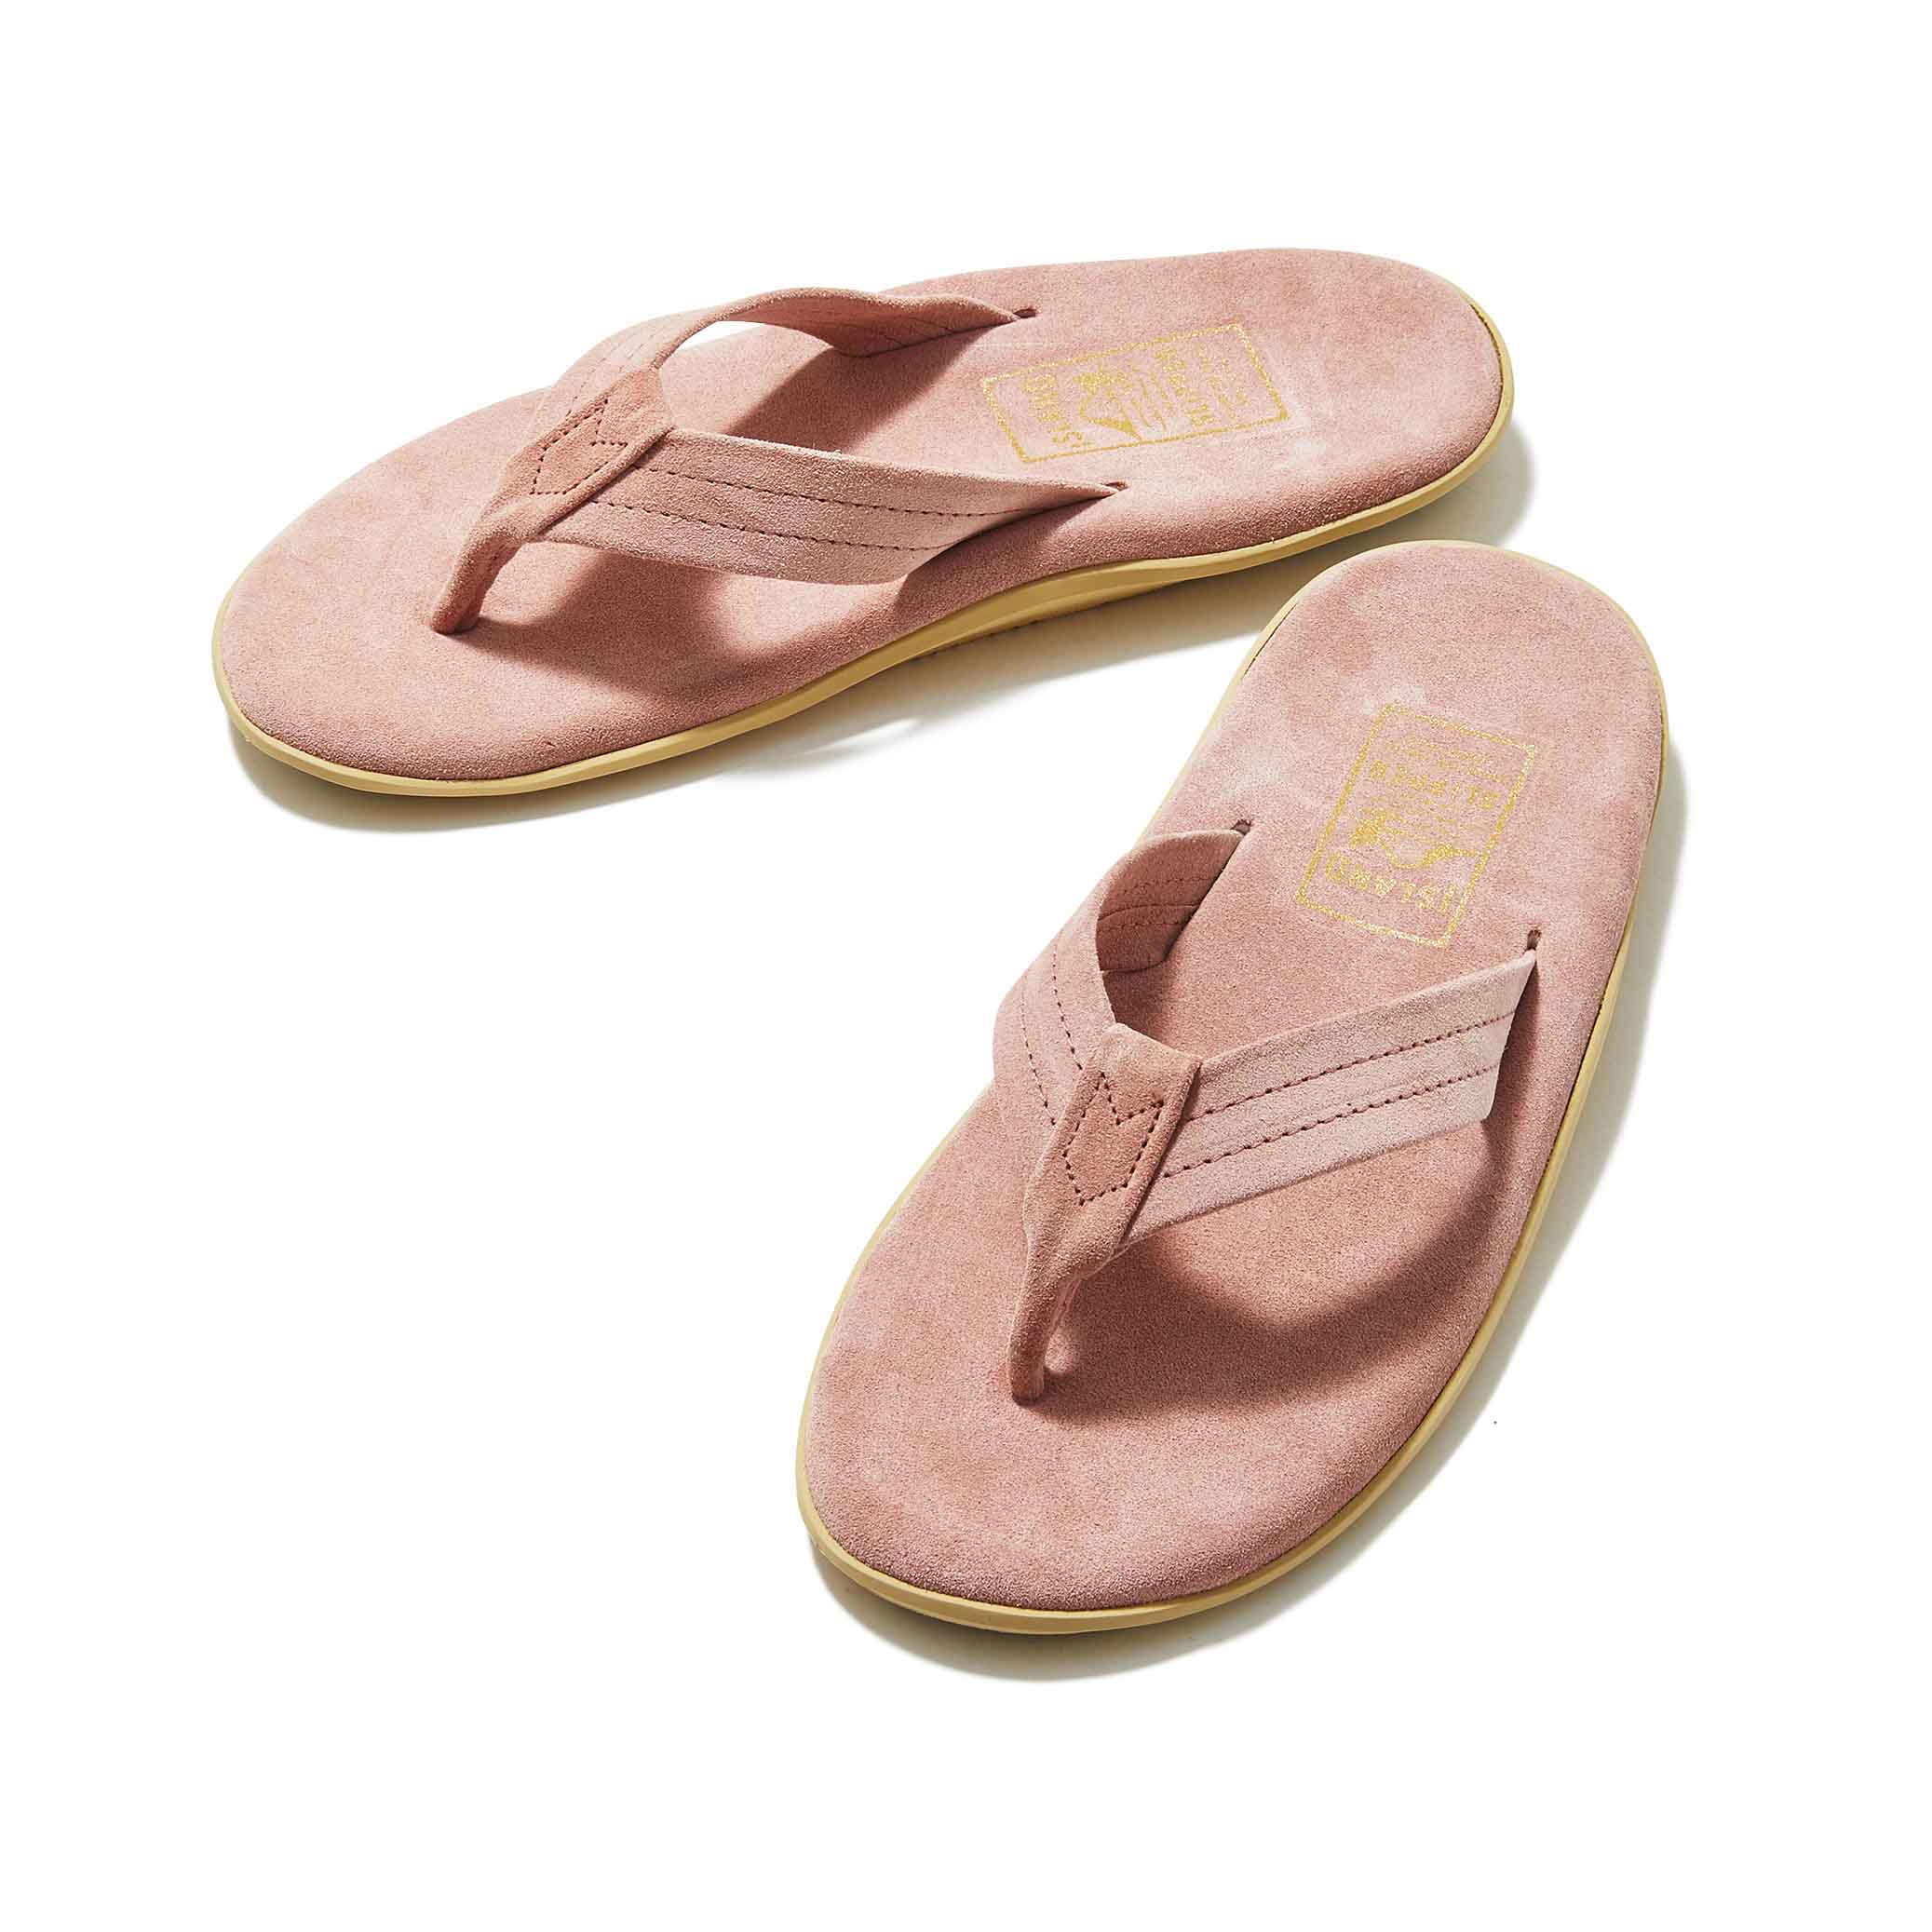 ISLAND SLIPPER / CLASSIC PINK SUEDE THONG PT203